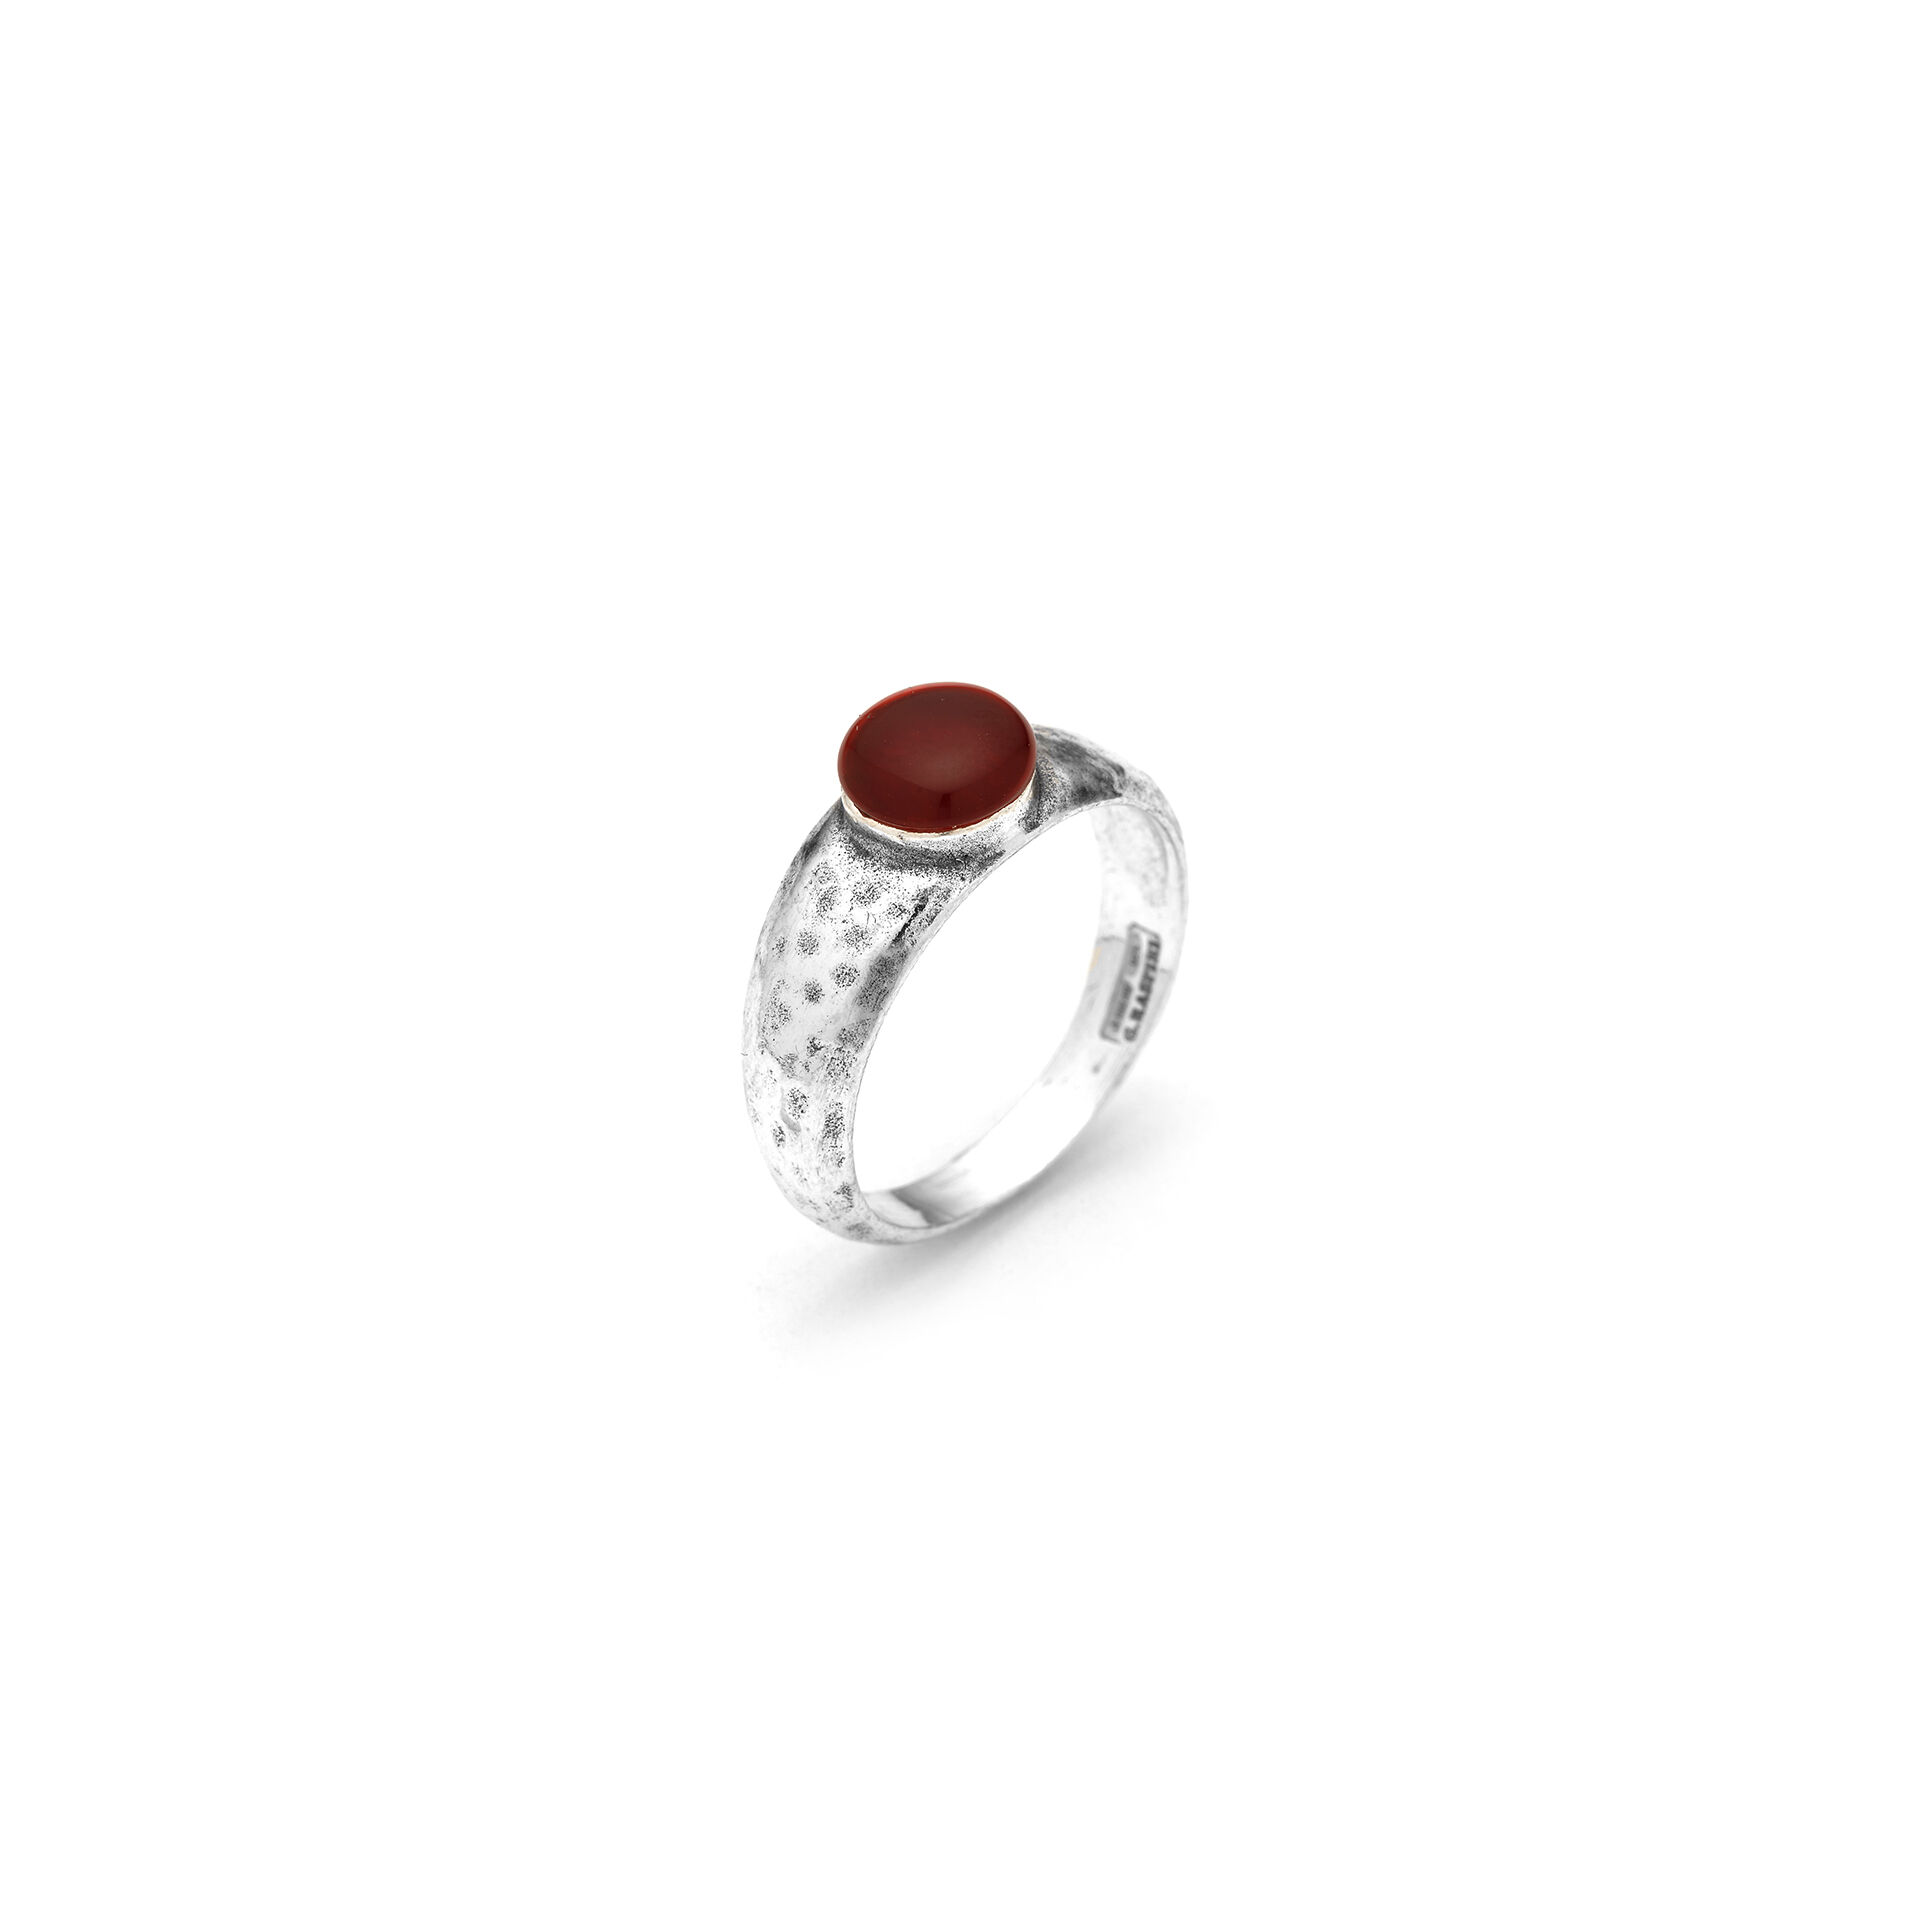 Carnelian Hammered Ring in Sterling Silver and carnelian | Giovanni Raspini